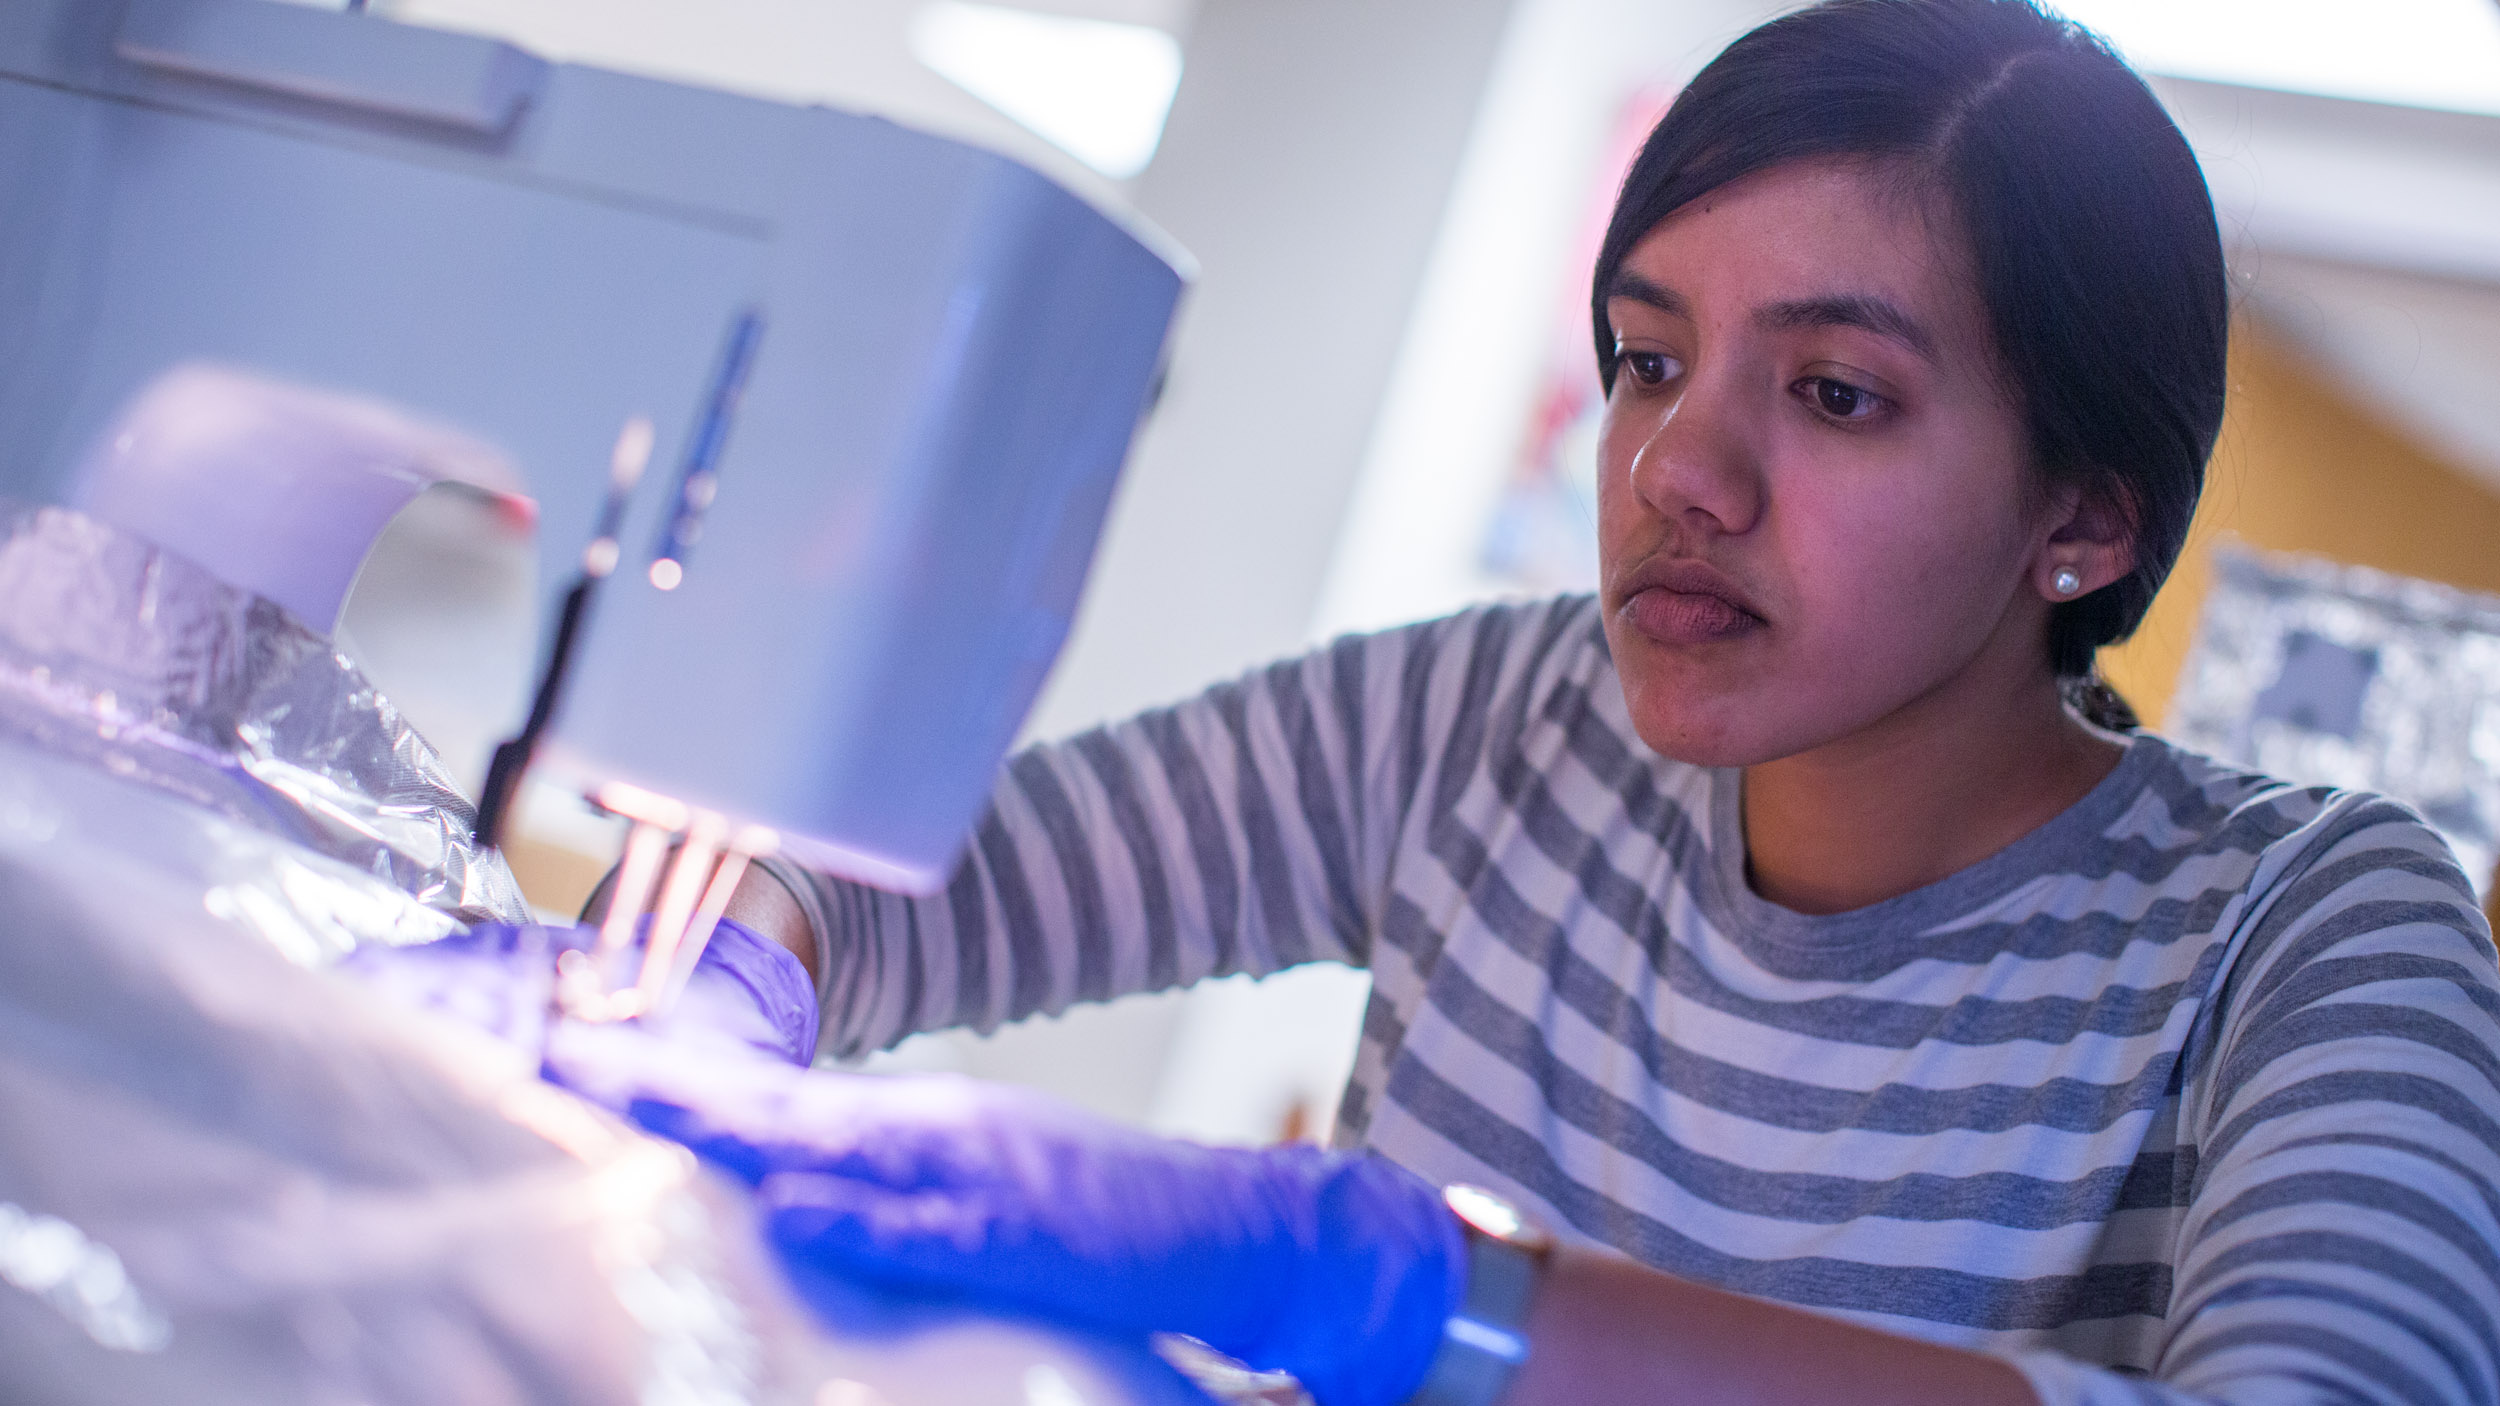 Recent UVA graduate and now lab technician Mita Tembe assembles specialized mylar thermal radiation blankets needed to keep the APOGEE instrument at its operating temperature of -300 degrees Fahrenheit.